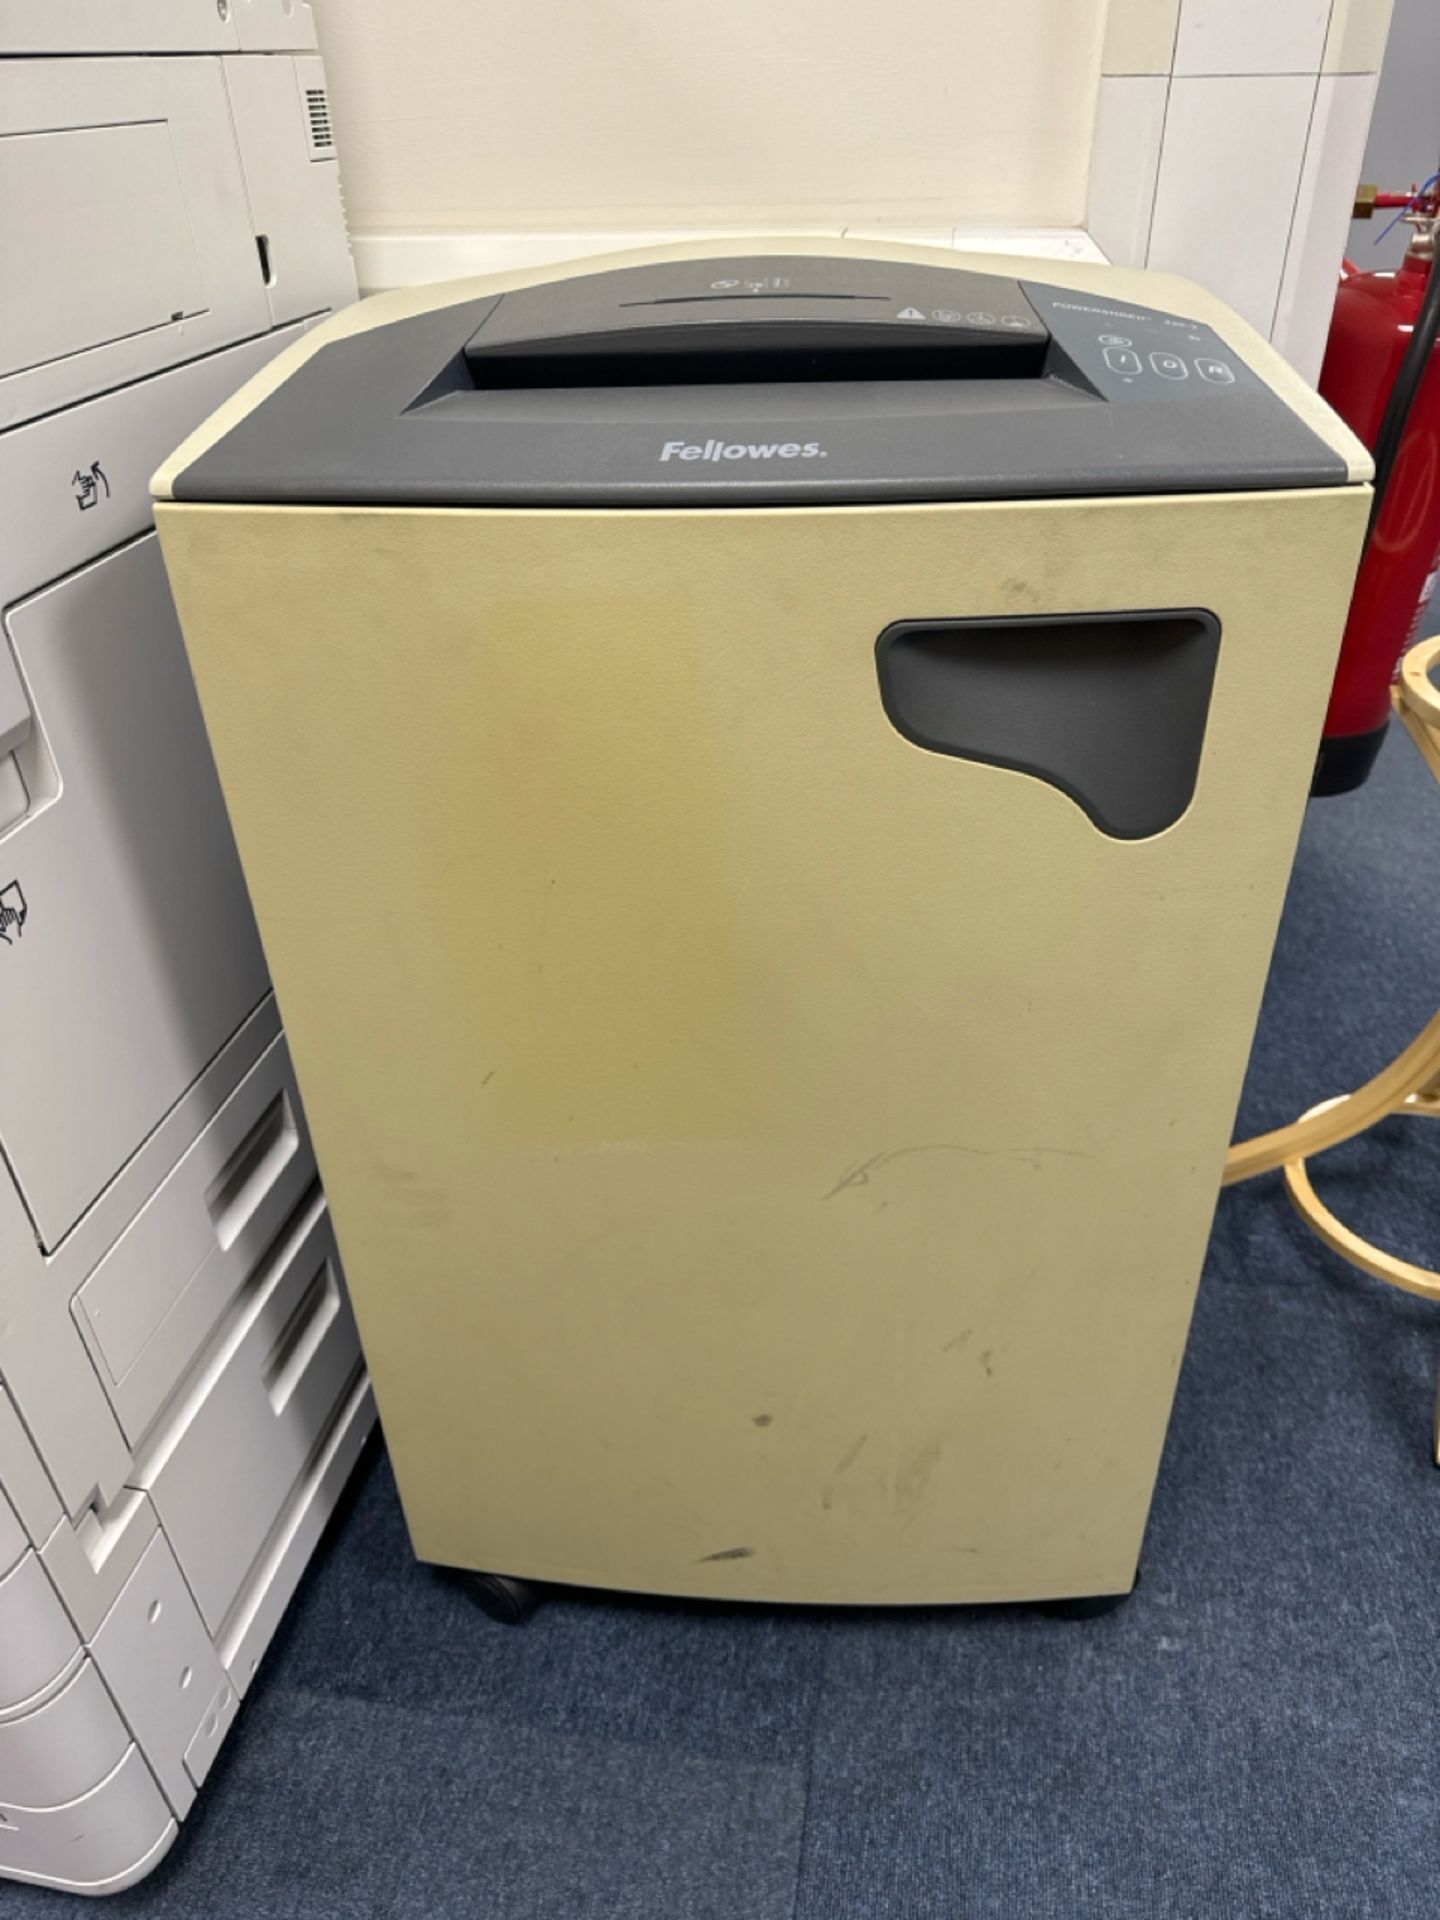 ref 19 - Fellowes Electric Paper Shredder - Image 2 of 3